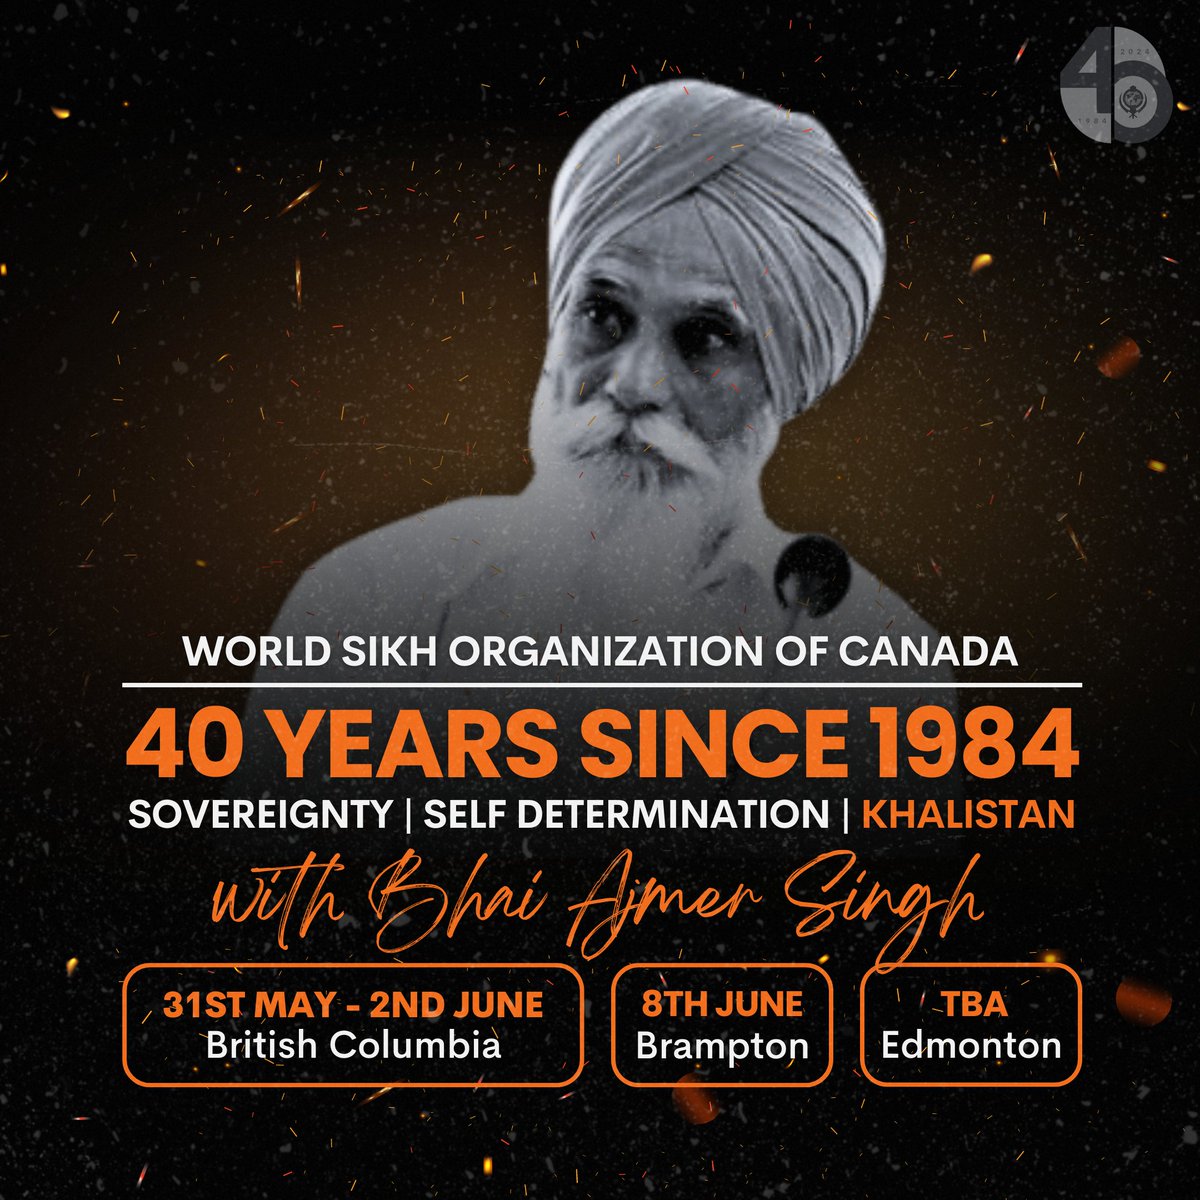 Join us for these events across Canada to commemorate the 40th anniversary of 1984, with special guest speaker Bhai Ajmer Singh. Bhai Sahib is prominent Sikh commentator and author who has written several books on Sikh principles, history, and Sikh sovereignty. Look out for